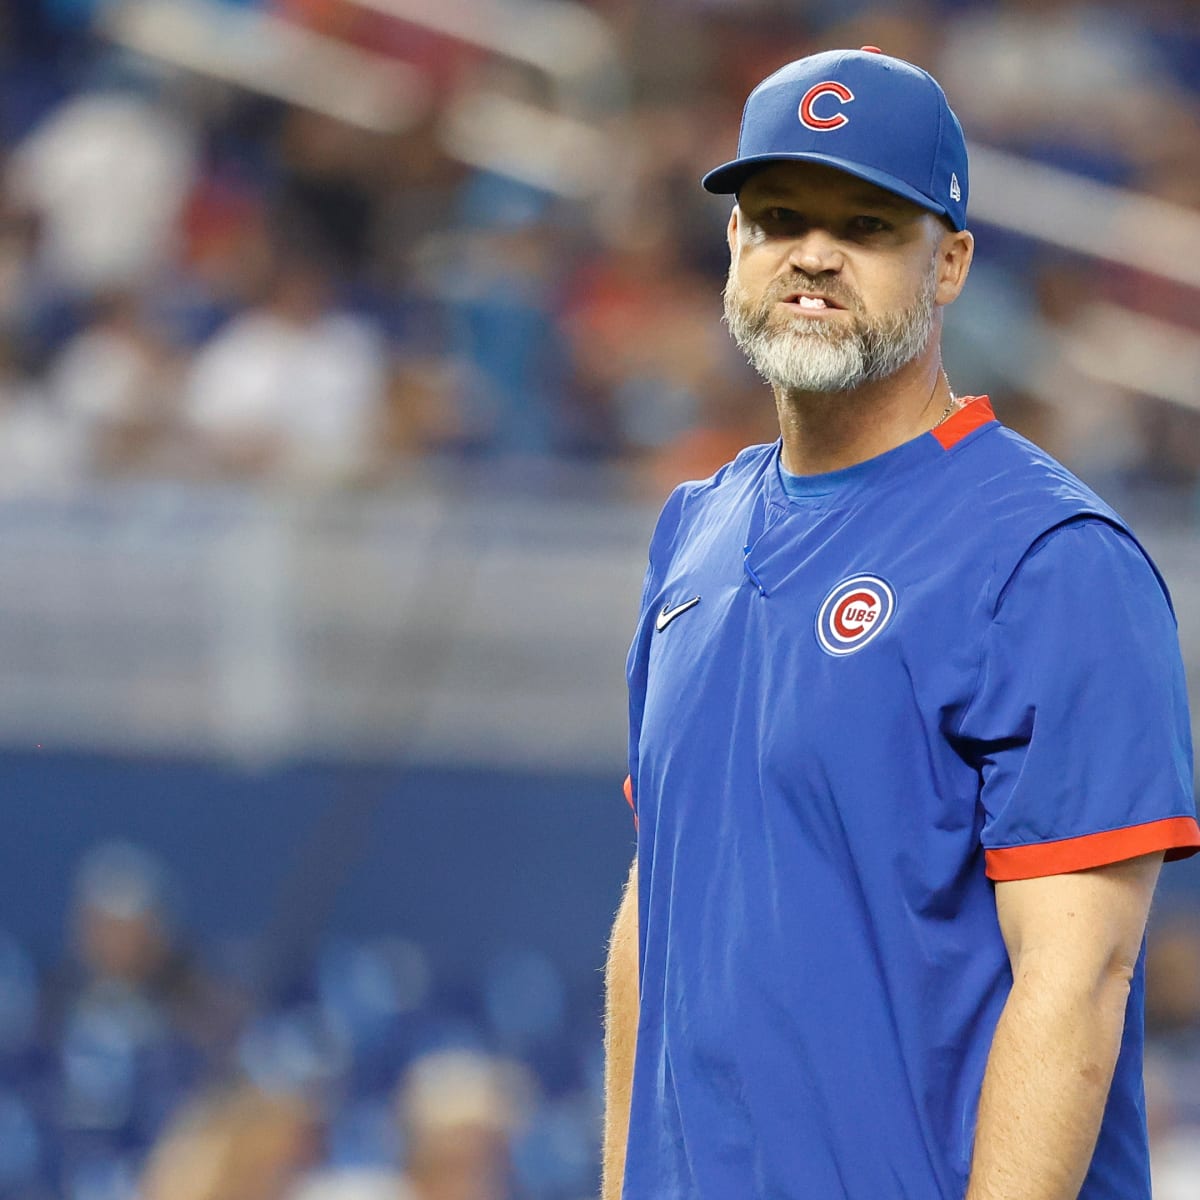 Cubs manager David Ross, Jed Hoyer test positive for COVID-19